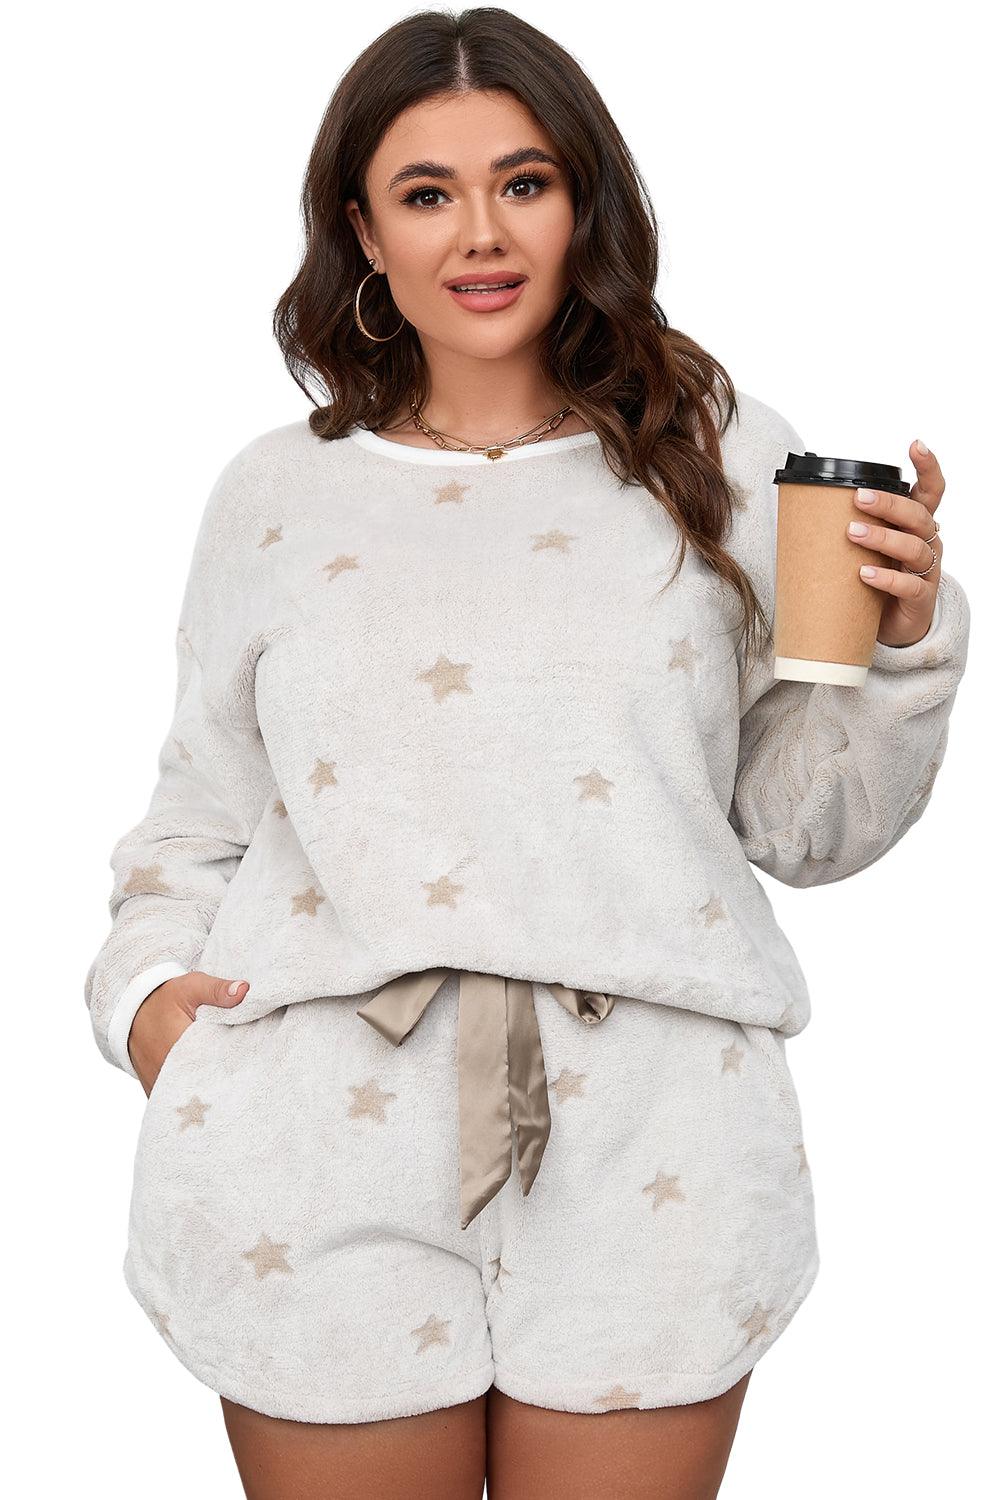 White Plush Star Pattern Long Sleeve Pullover and Shorts Lounge Set - L & M Kee, LLC